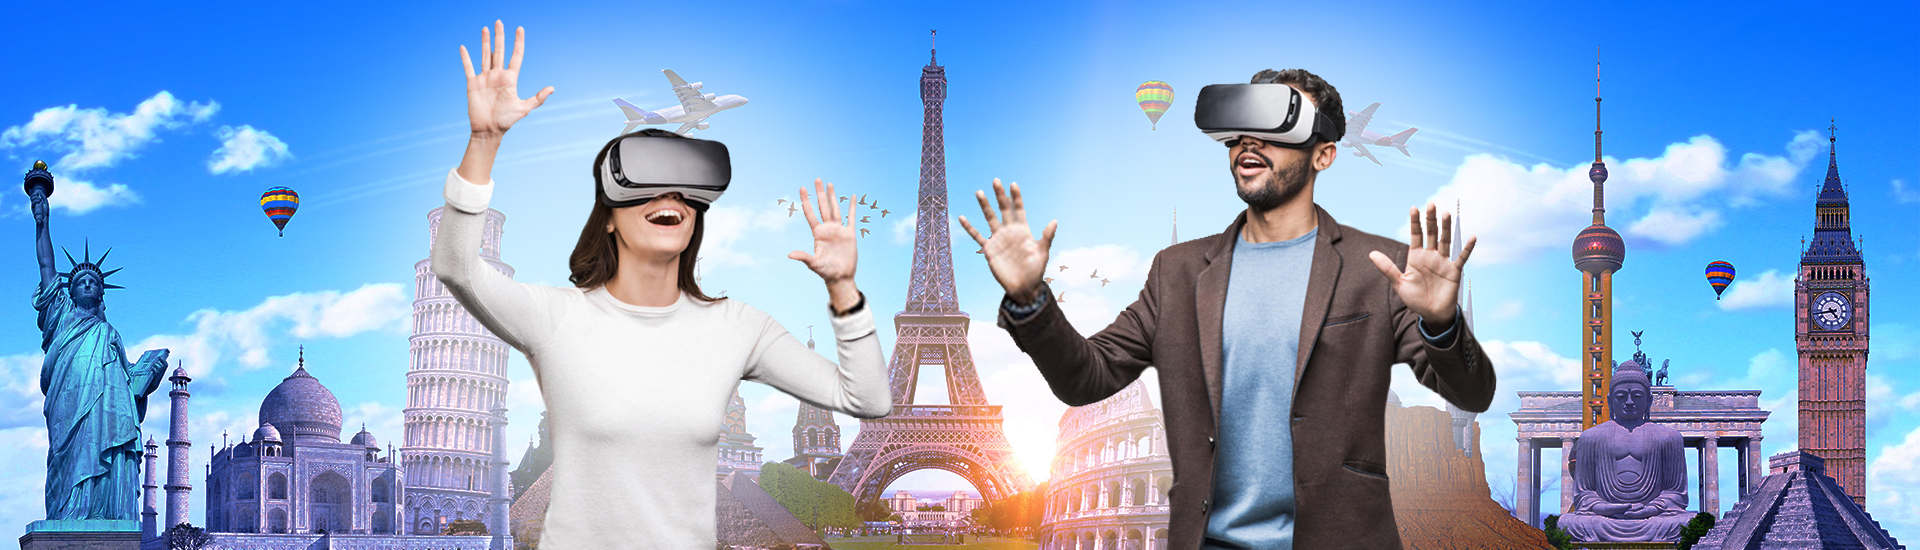 virtual reality in tourism marketing